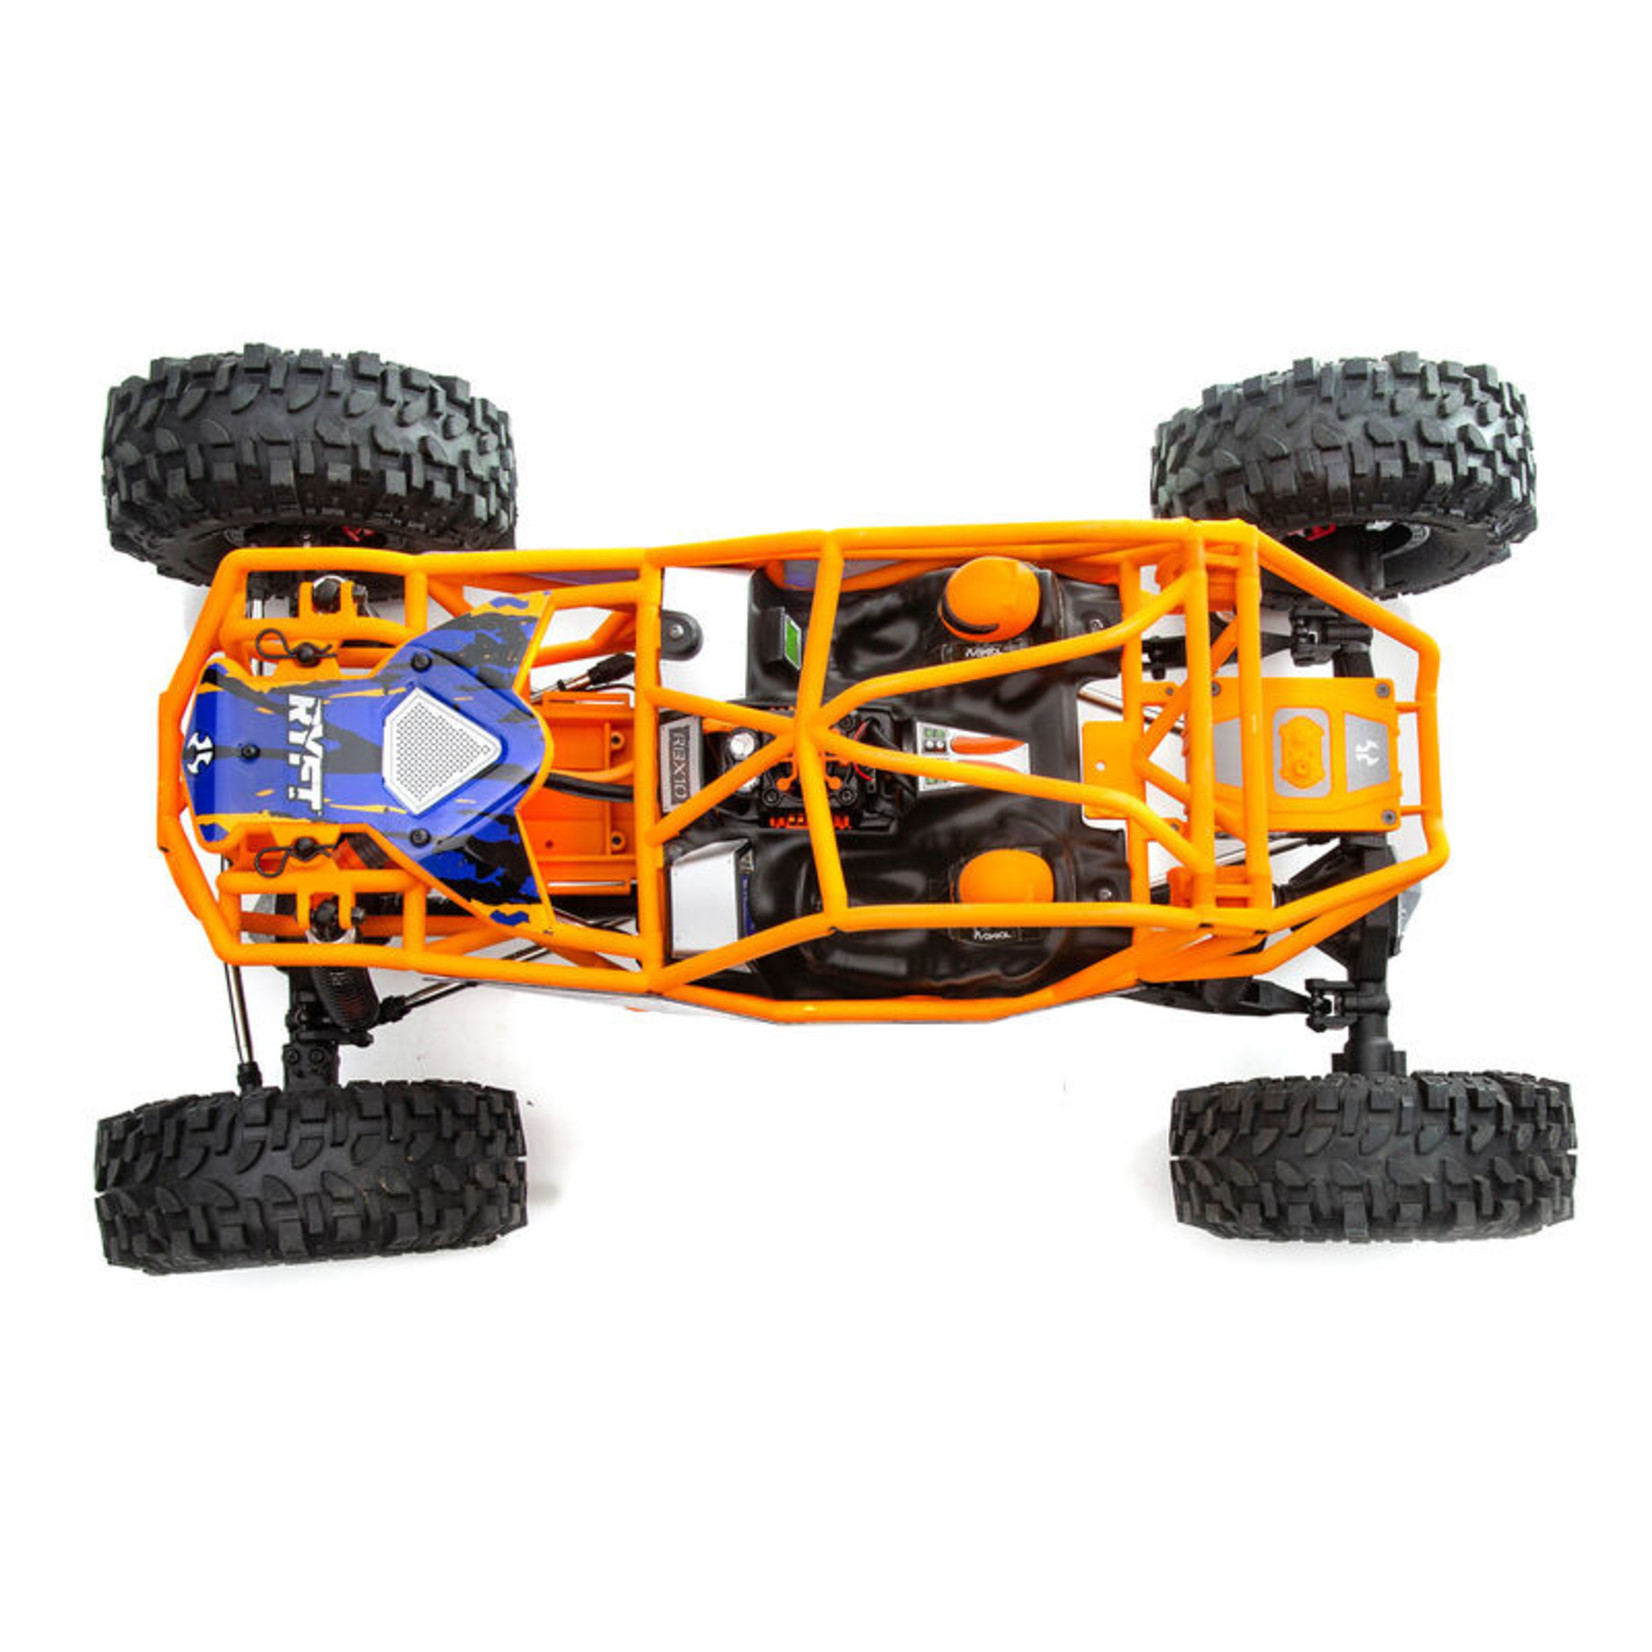 Axial Racing AXI03005T2 1/10 RBX10 Ryft 4WD Brushless Rock Bouncer RTR, Black